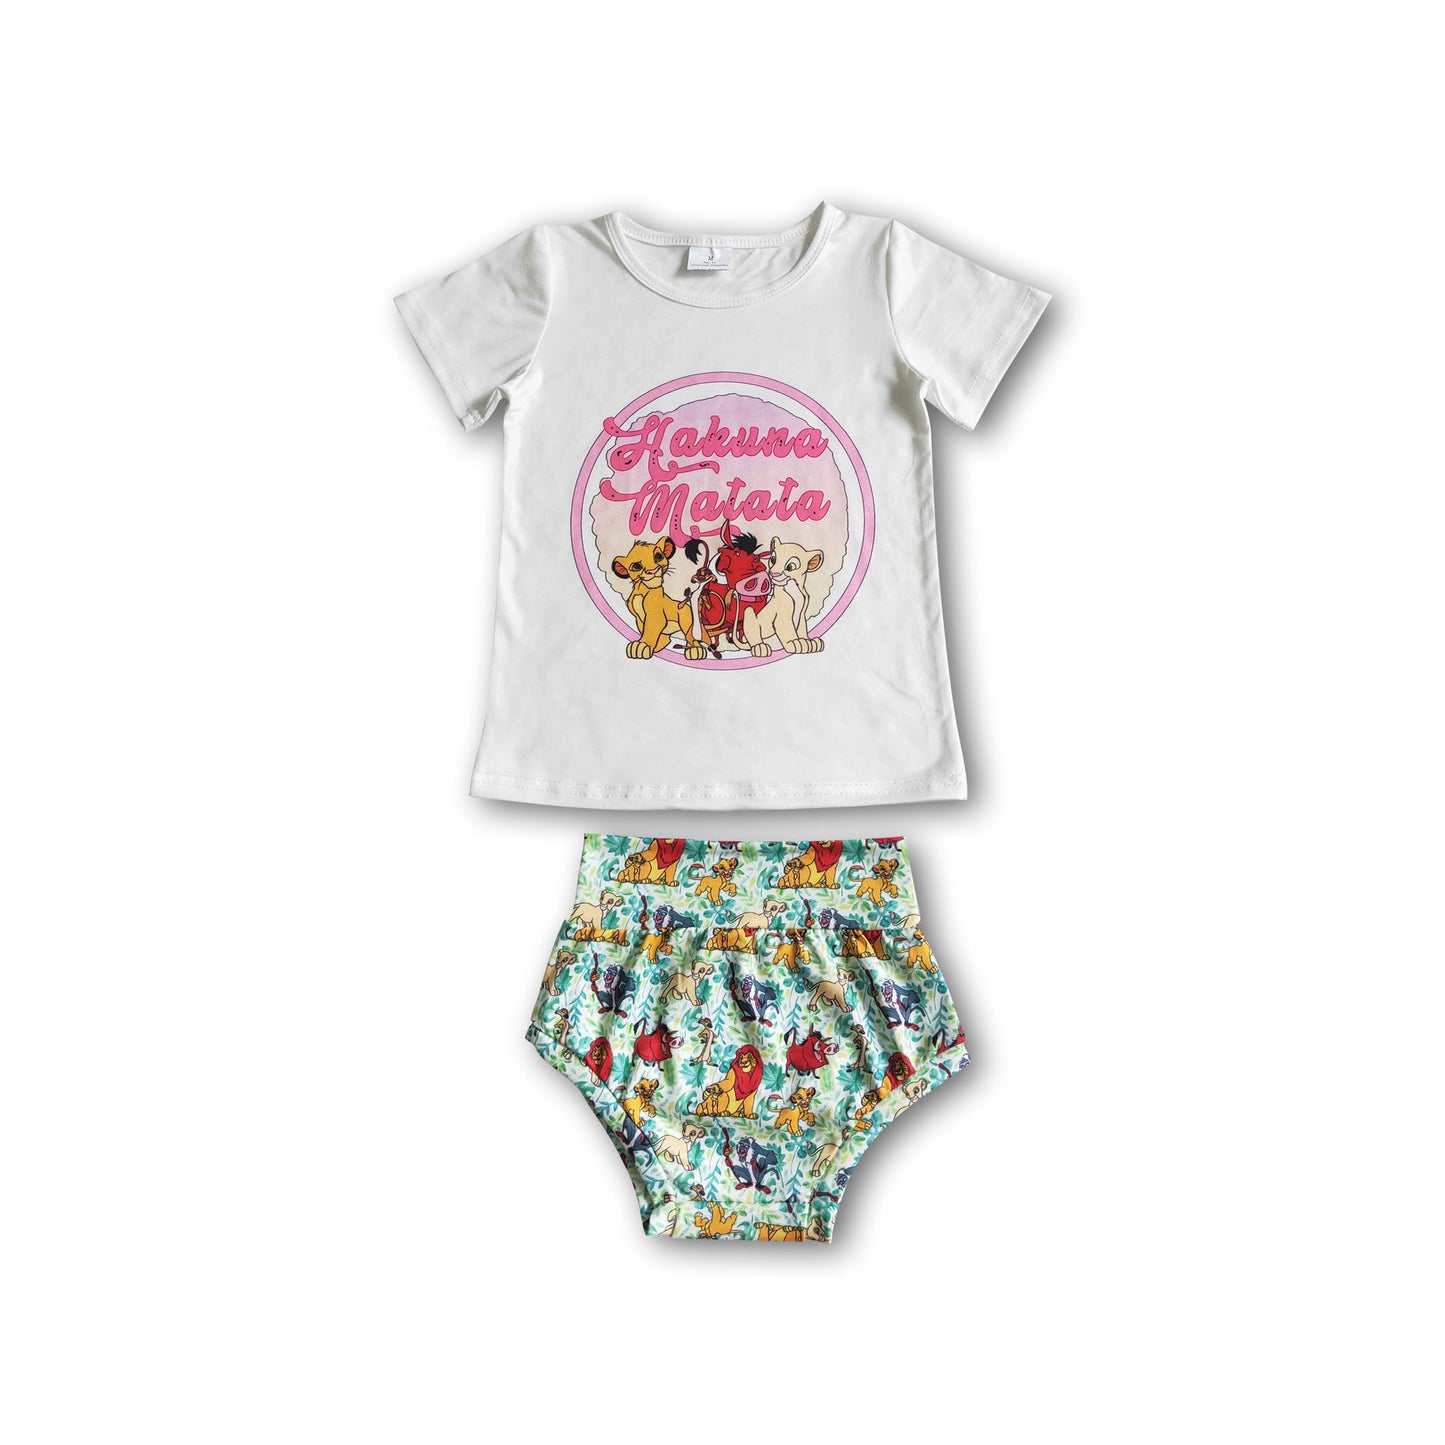 Lion print baby bummies clothes